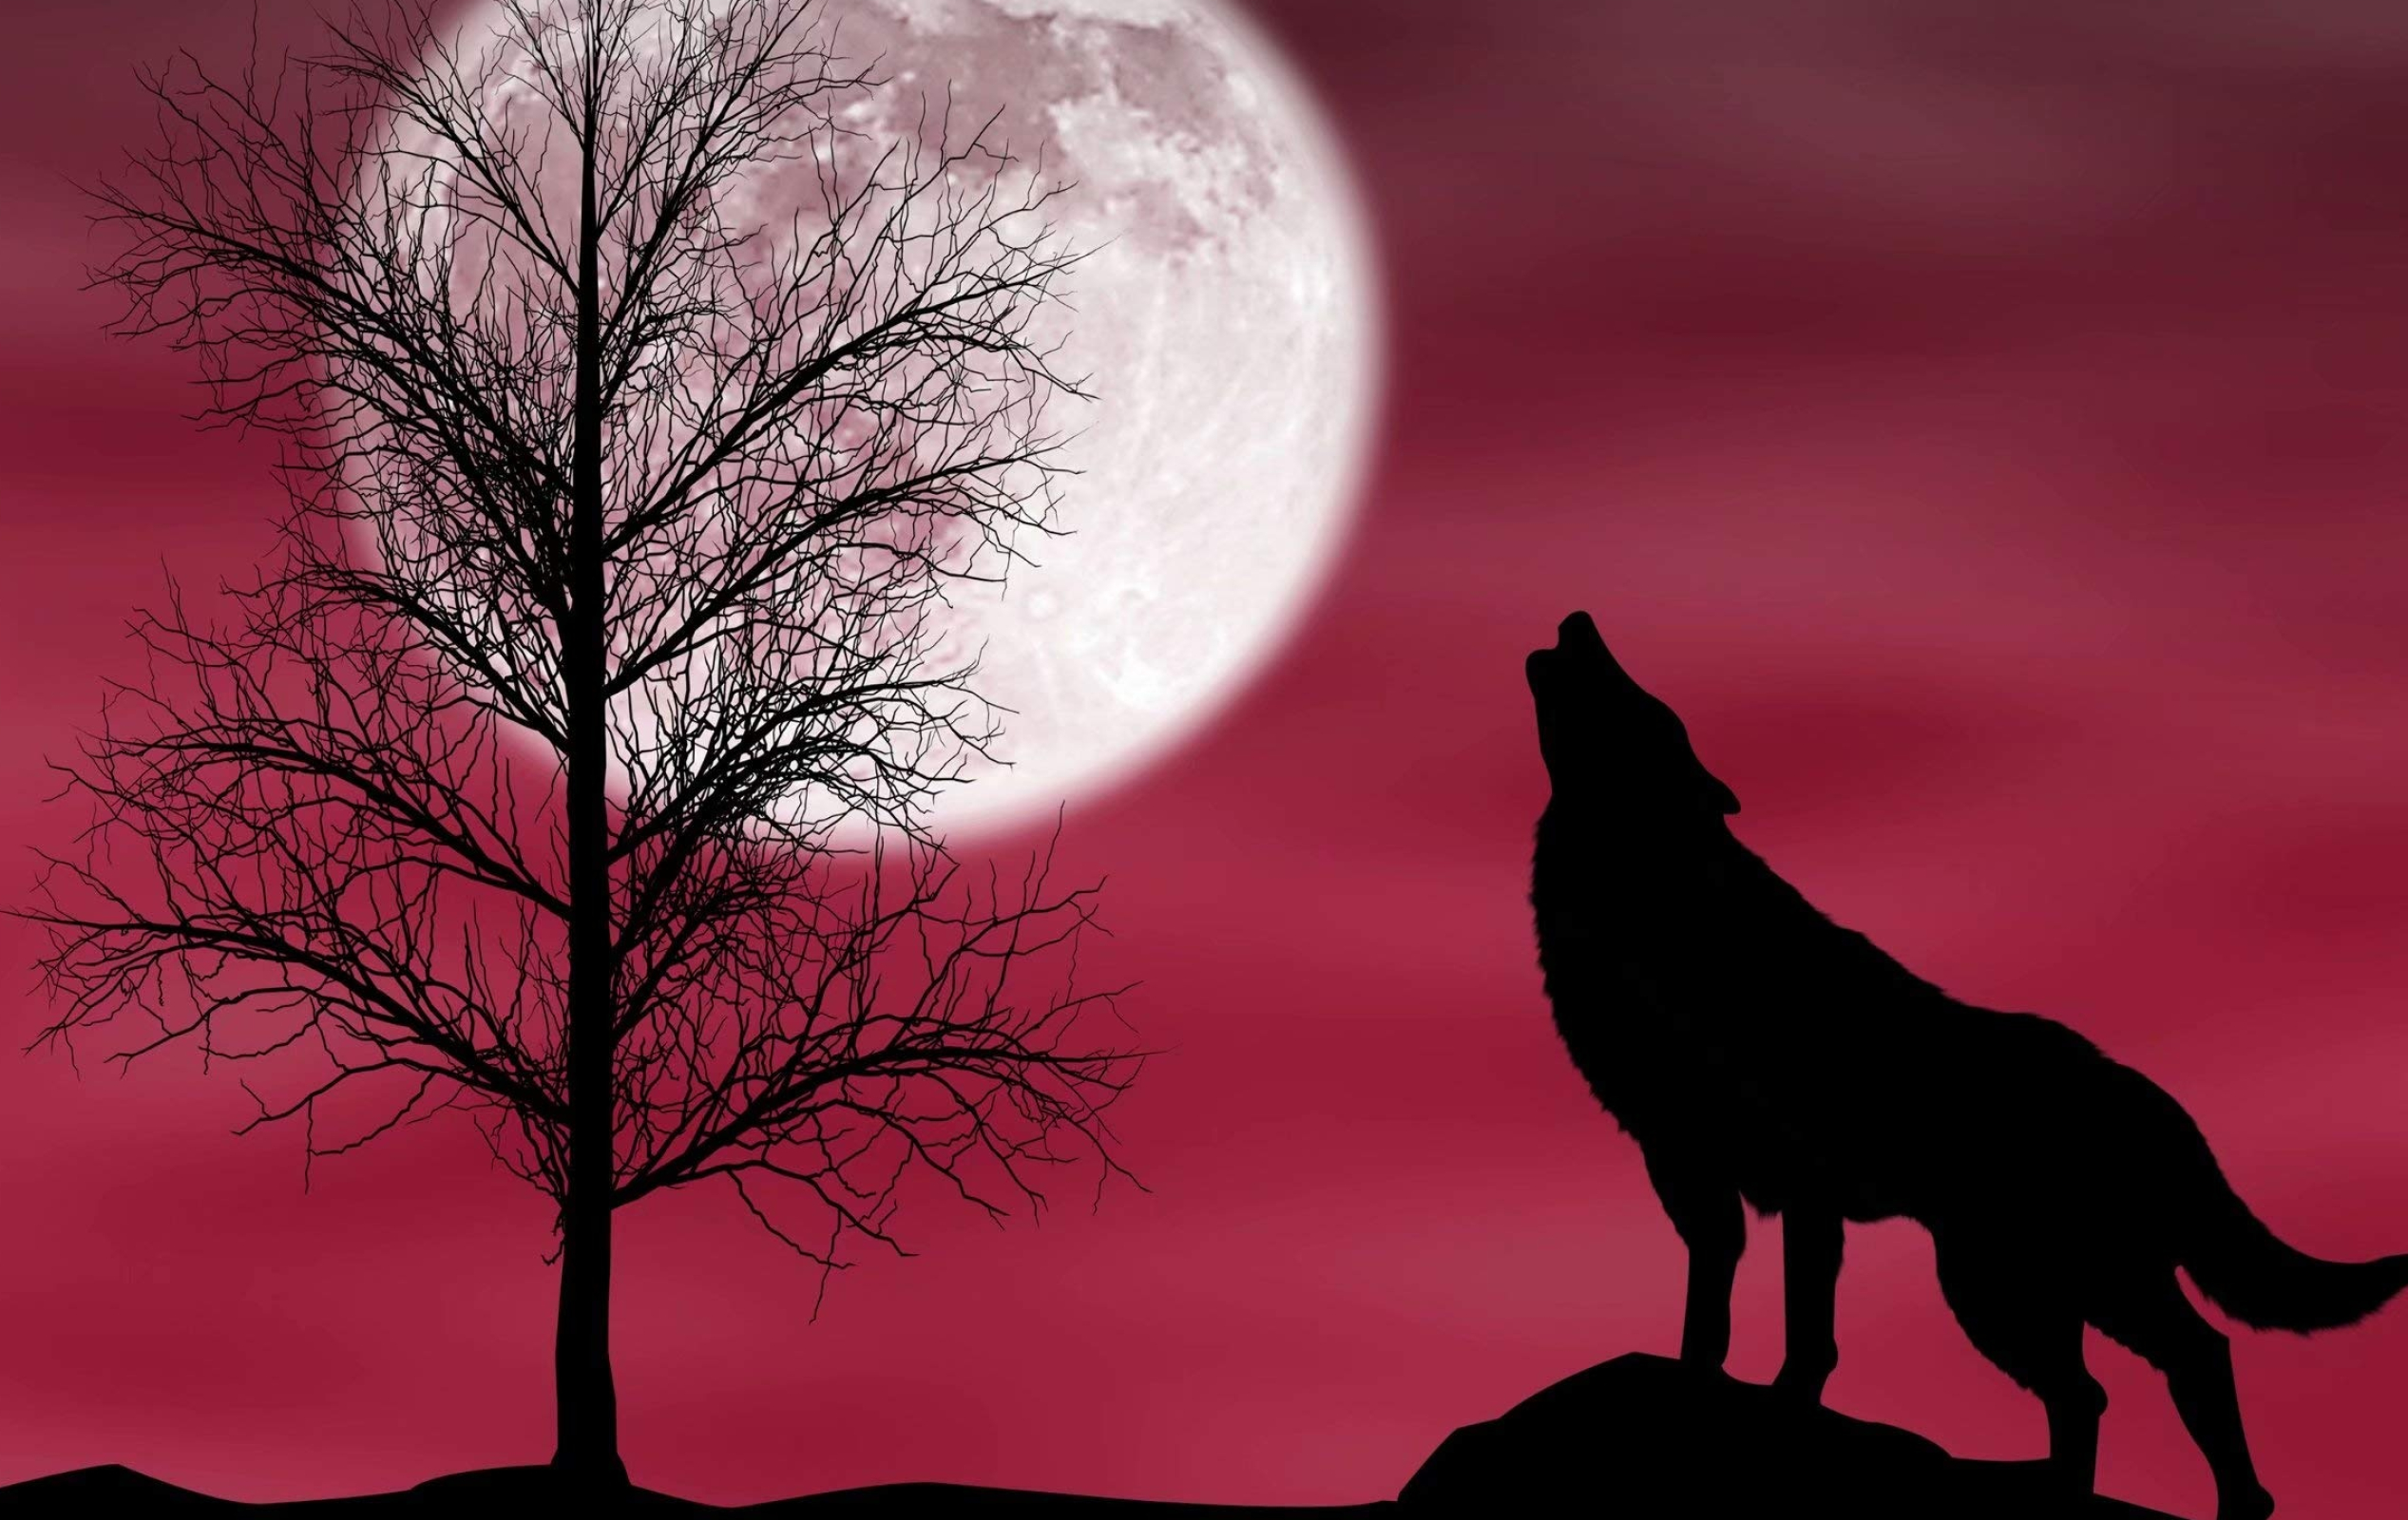 Wolf flag by the tree, Patriotic and majestic, Amazon. com, High-quality fabric, 2540x1600 HD Desktop